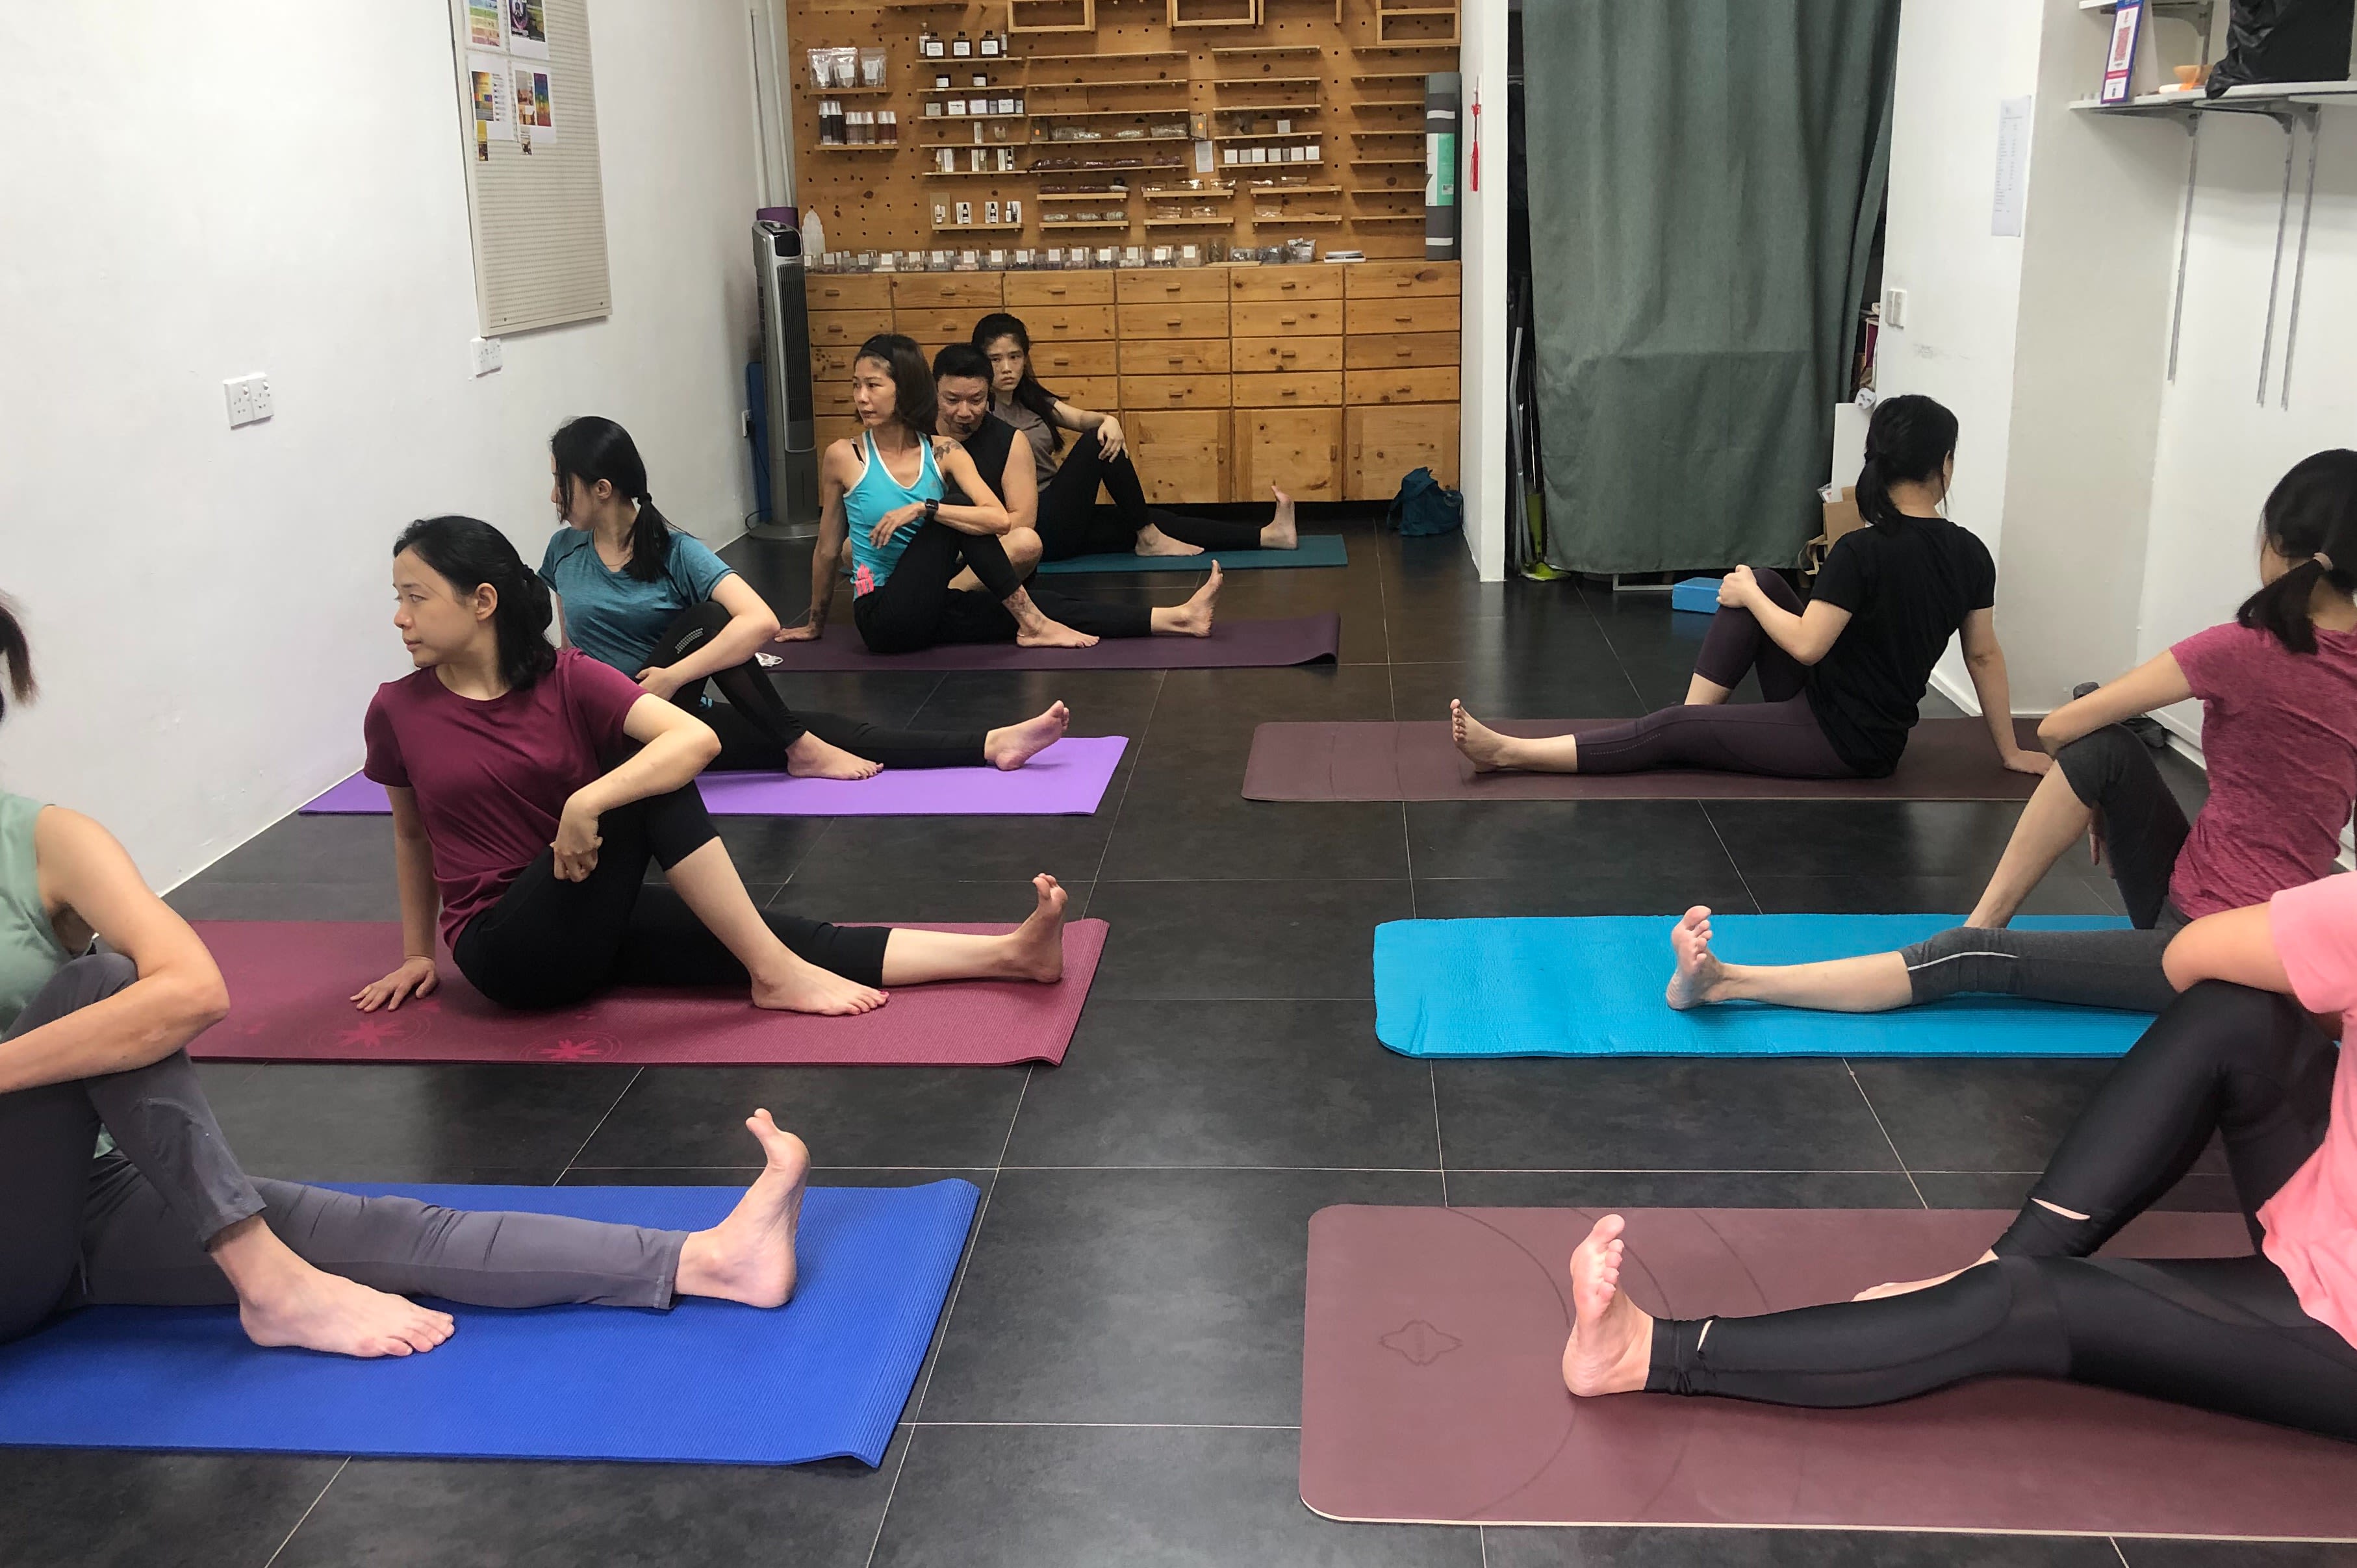 Yoga Tree Read Reviews And Book Classes On Classpass